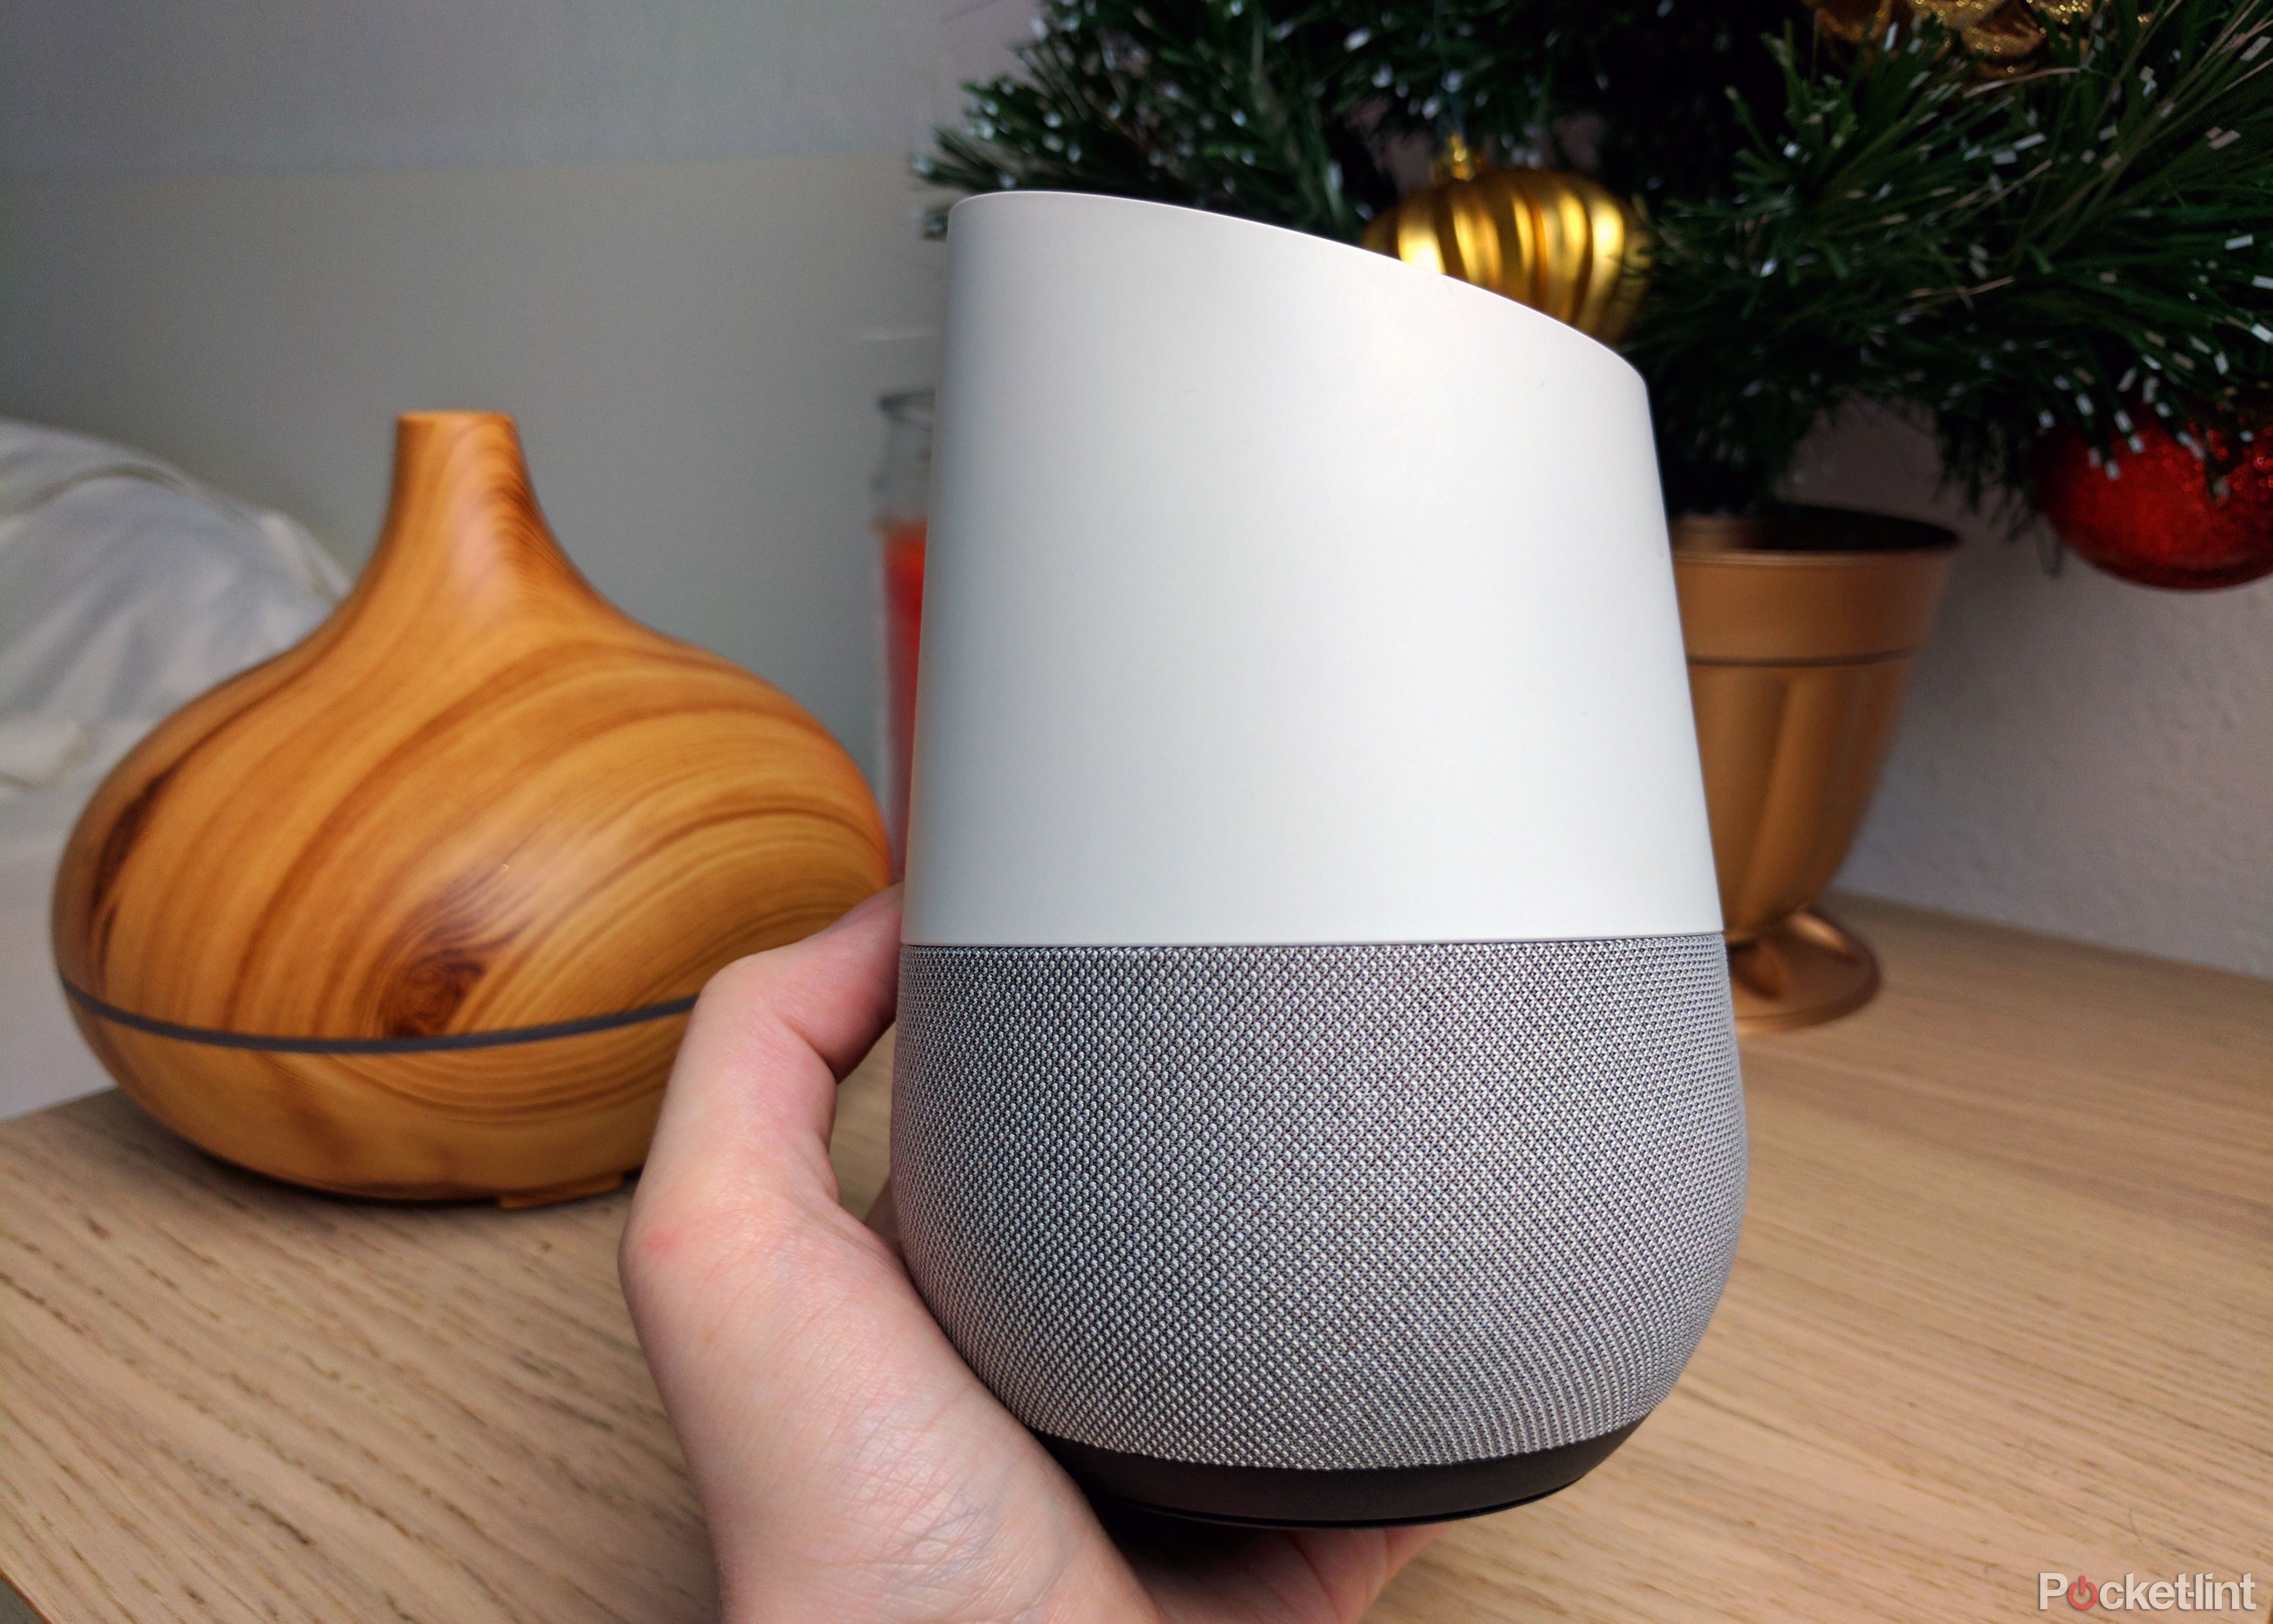 google wants to stuff another device into the next google home speaker image 1